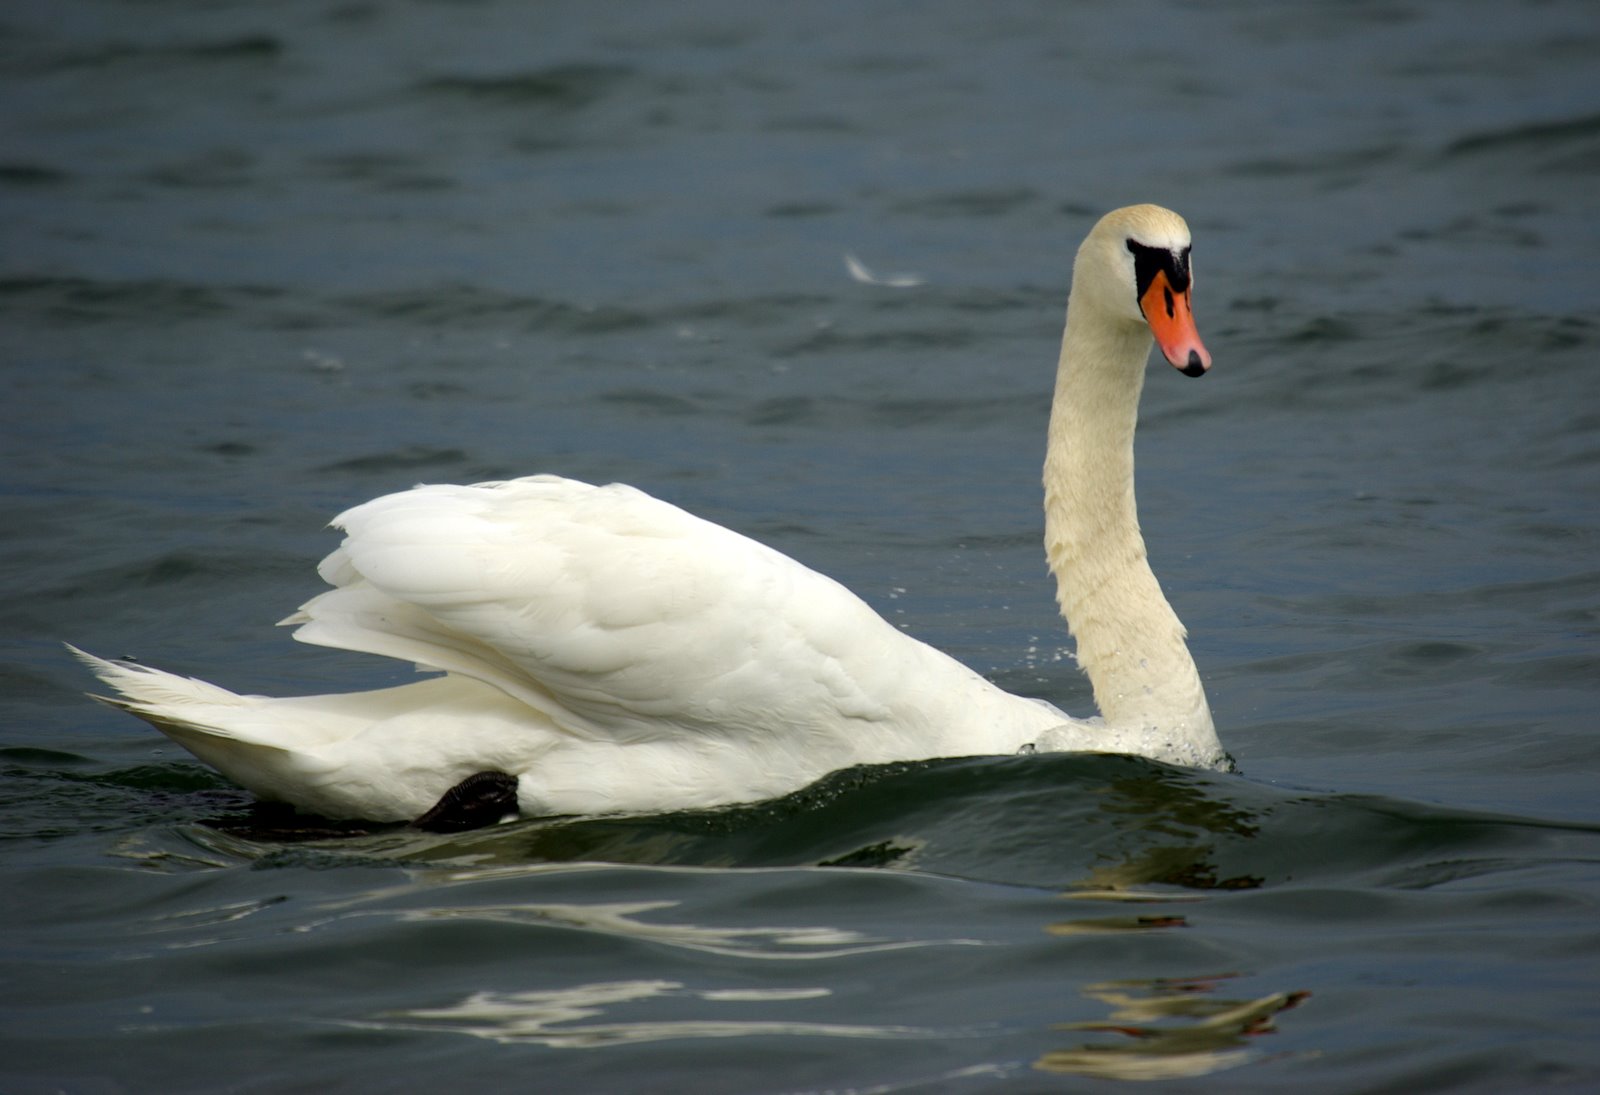 a swan with its front wing extended in water